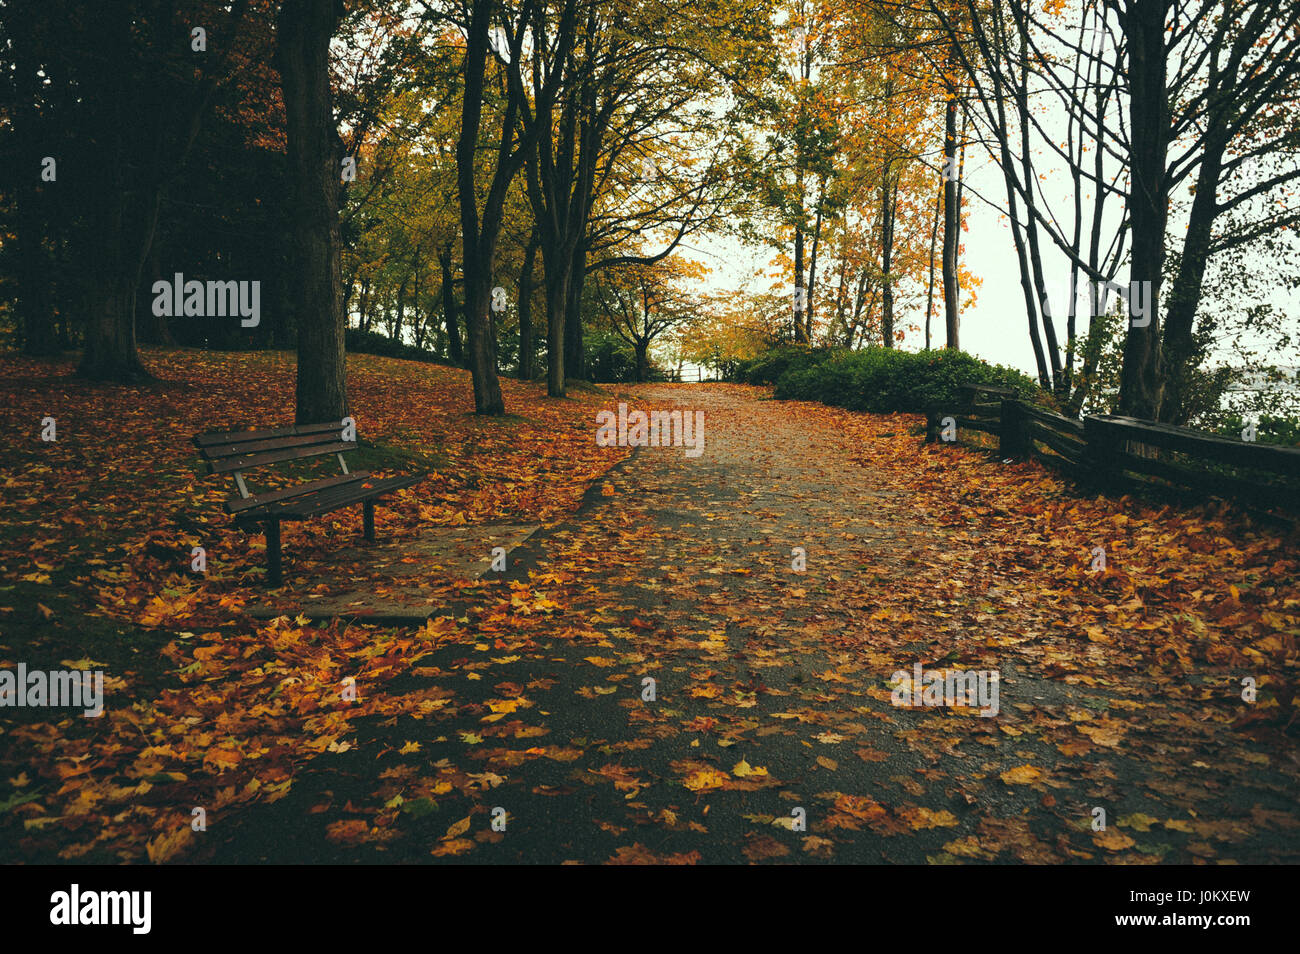 Path heavy with fallen Autumn leaves on a rainy day. Stock Photo